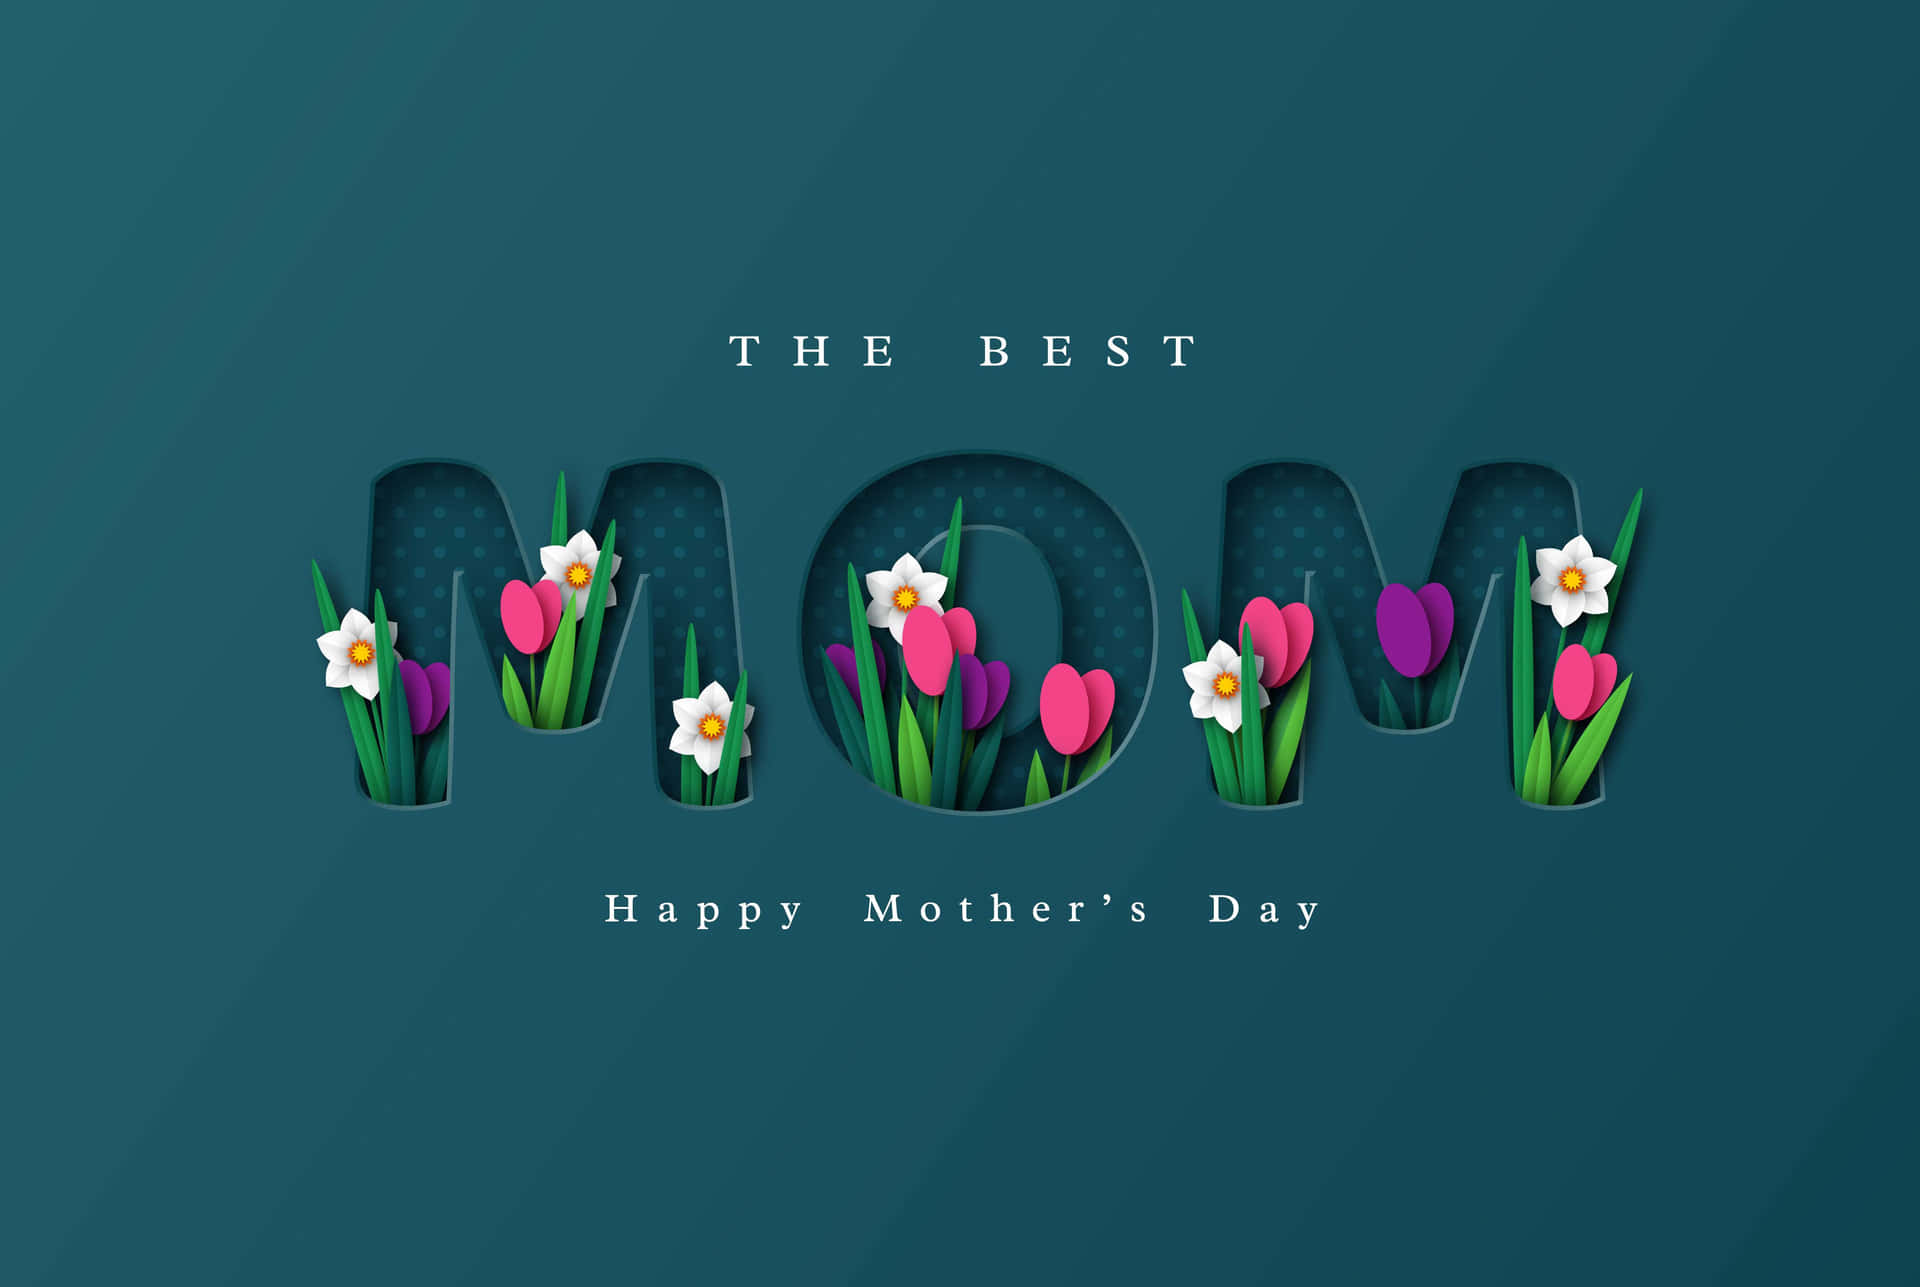 Celebrate your mom on this special day of love and appreciation!